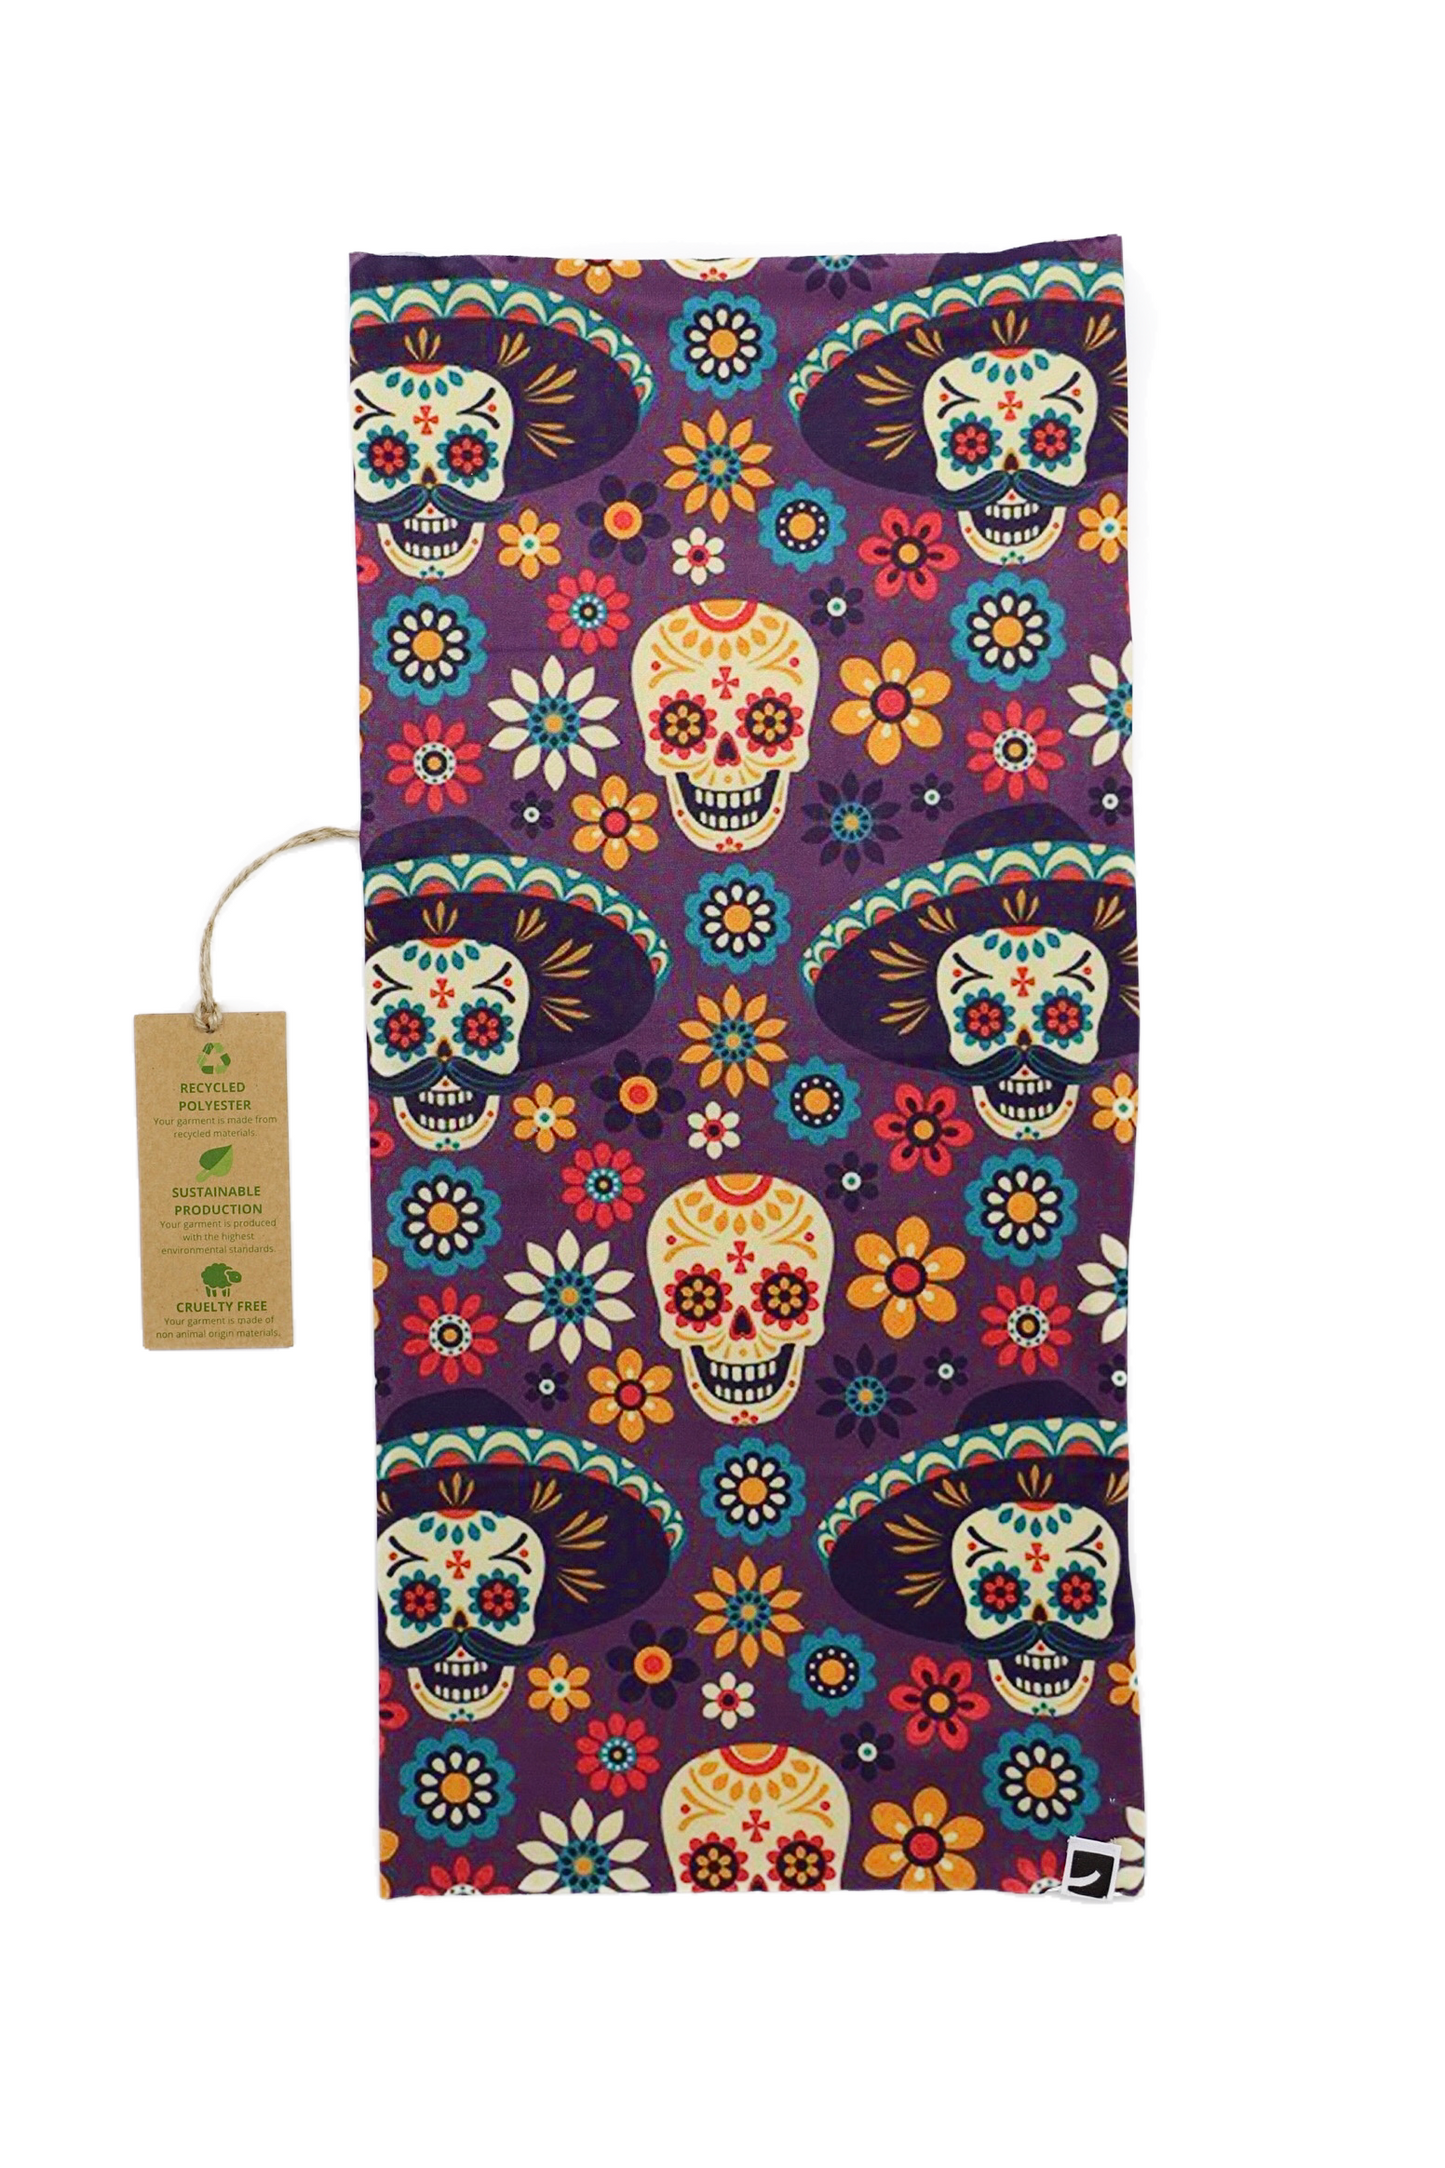 This is a unisex, multifunctional and sustainable bandana with Mexican skull print. It is made from recycled polyester which is breathable, durable, soft to touch, easy to care and fast drying material. It makes it perfectly suitable for all kinds of sports like biking, hiking, jogging or skiing. This is a versatile bandana that can be used as a scarf, face mask, bandana or headband and it is also known as tube scarf, neck gaiter or face mask. It is a vegan product certified by PETA.